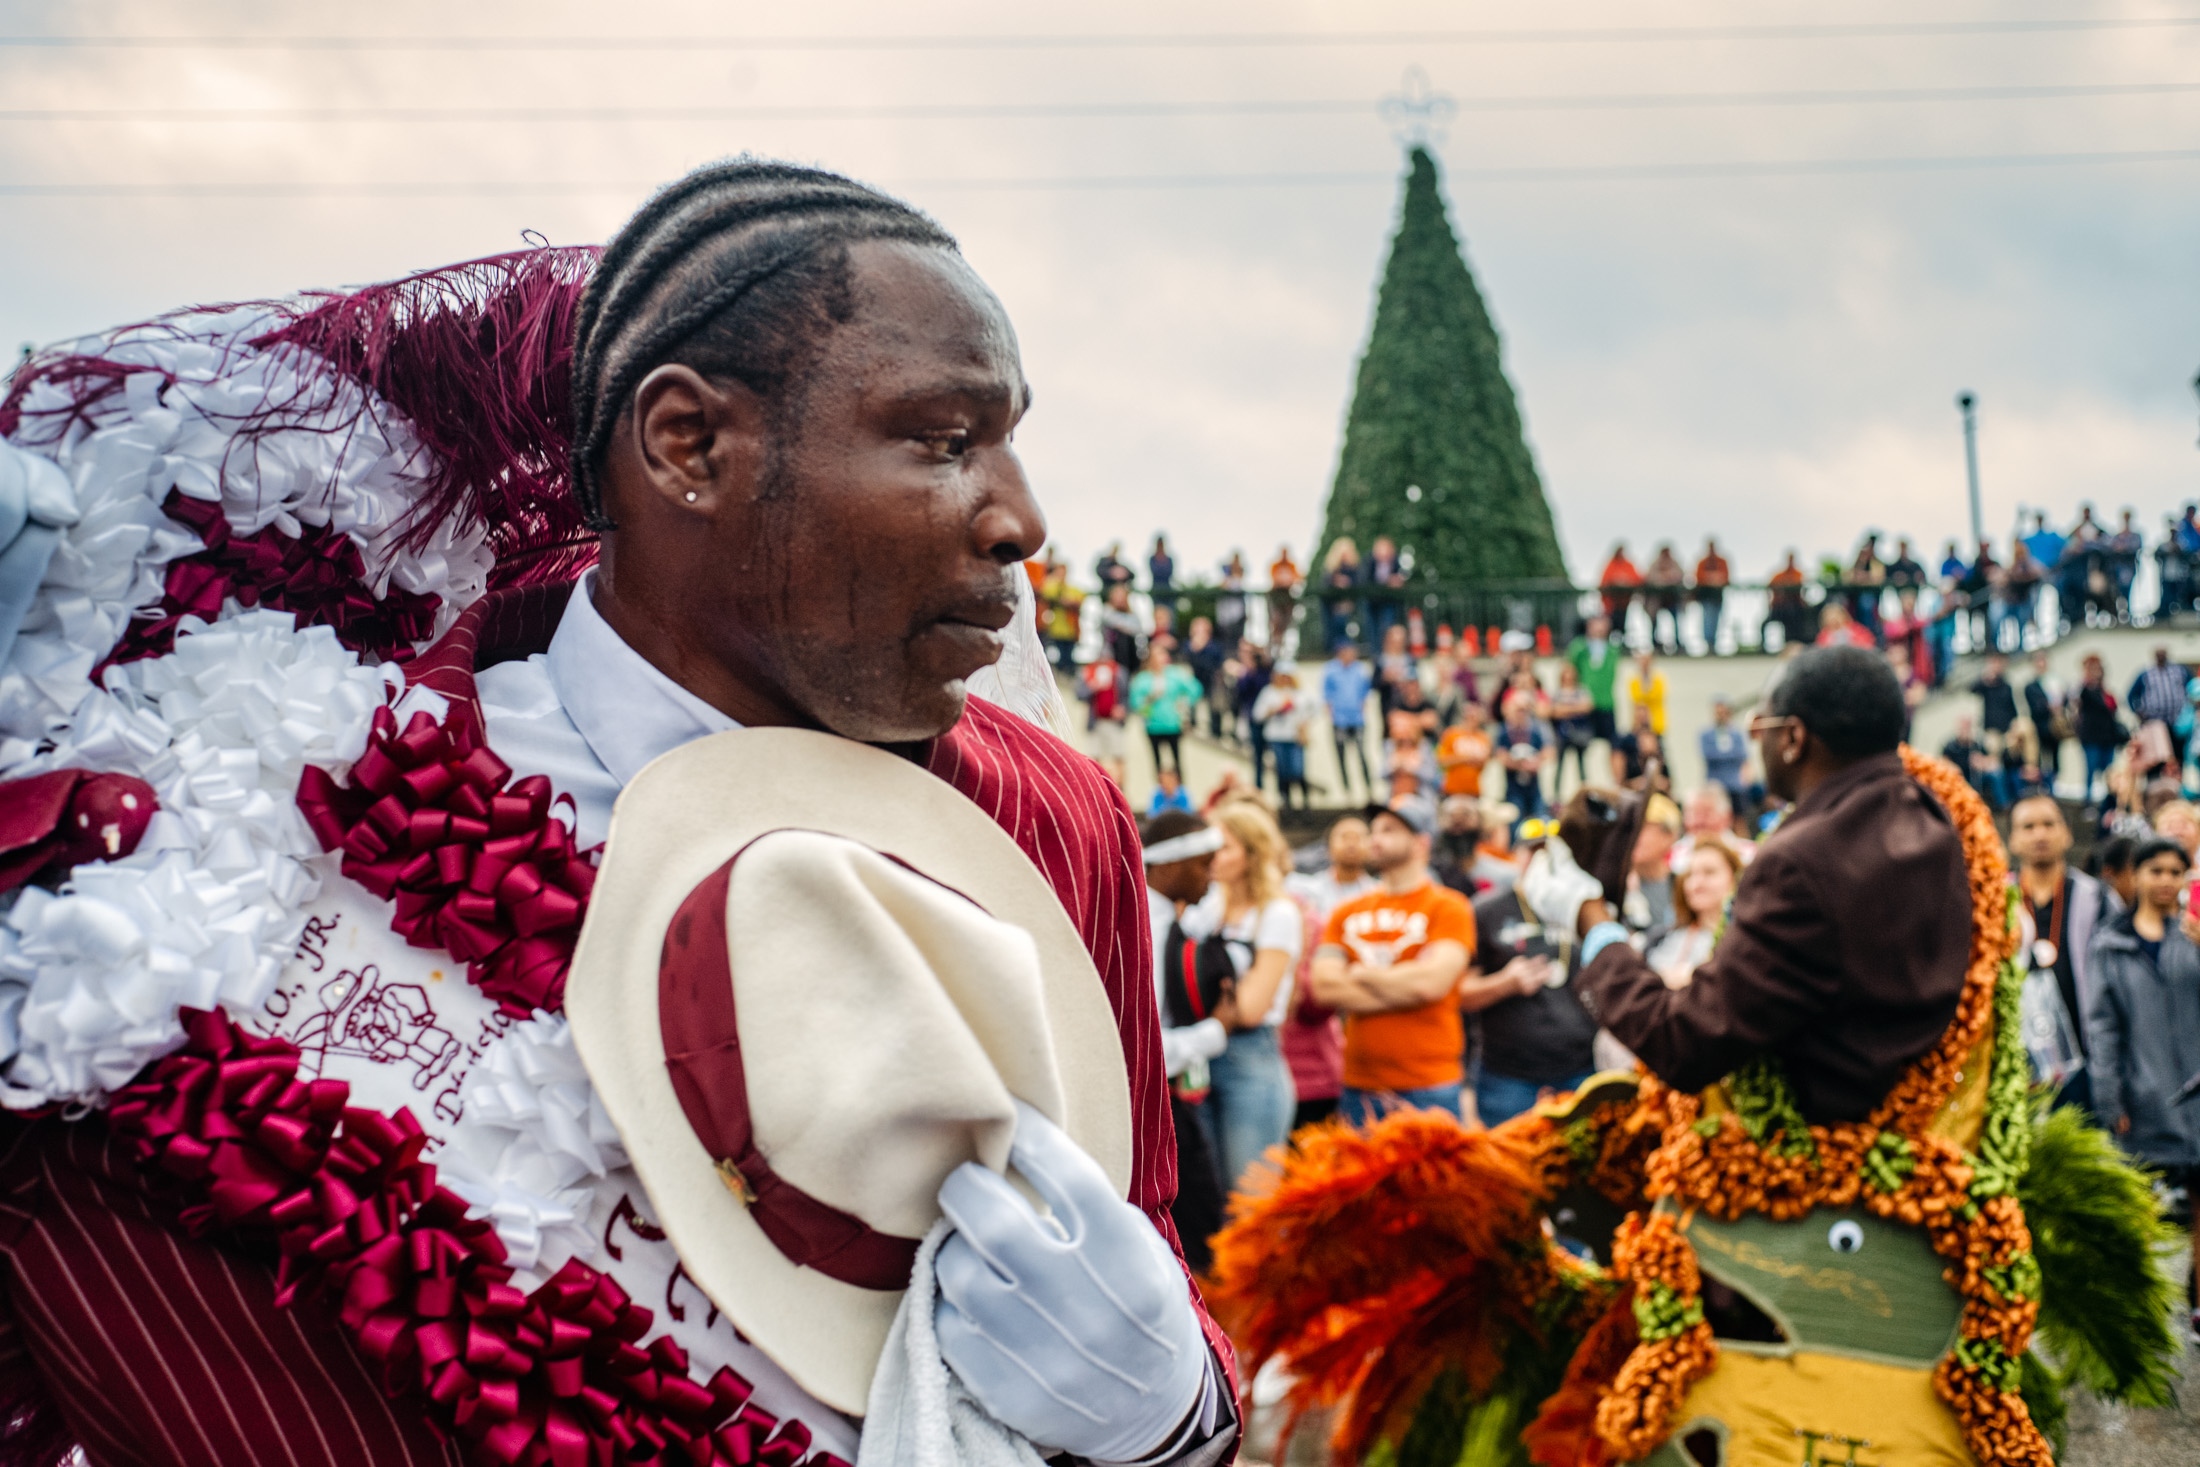 Carnival, New Orleans - Street Portrait, New Years Parade